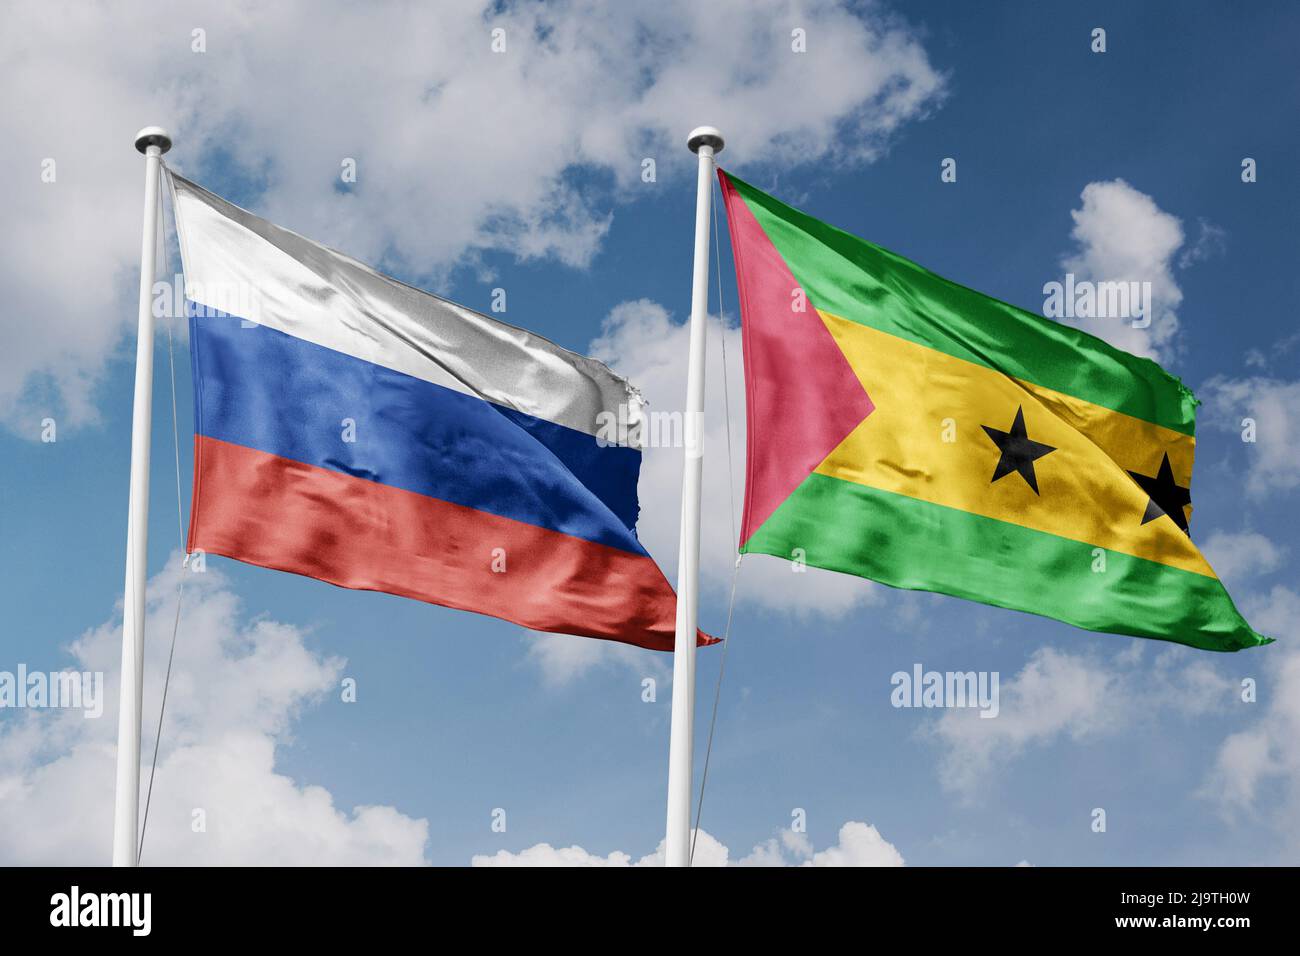 Russia and Sao Tome and Principe two flags on flagpoles and blue cloudy sky background Stock Photo